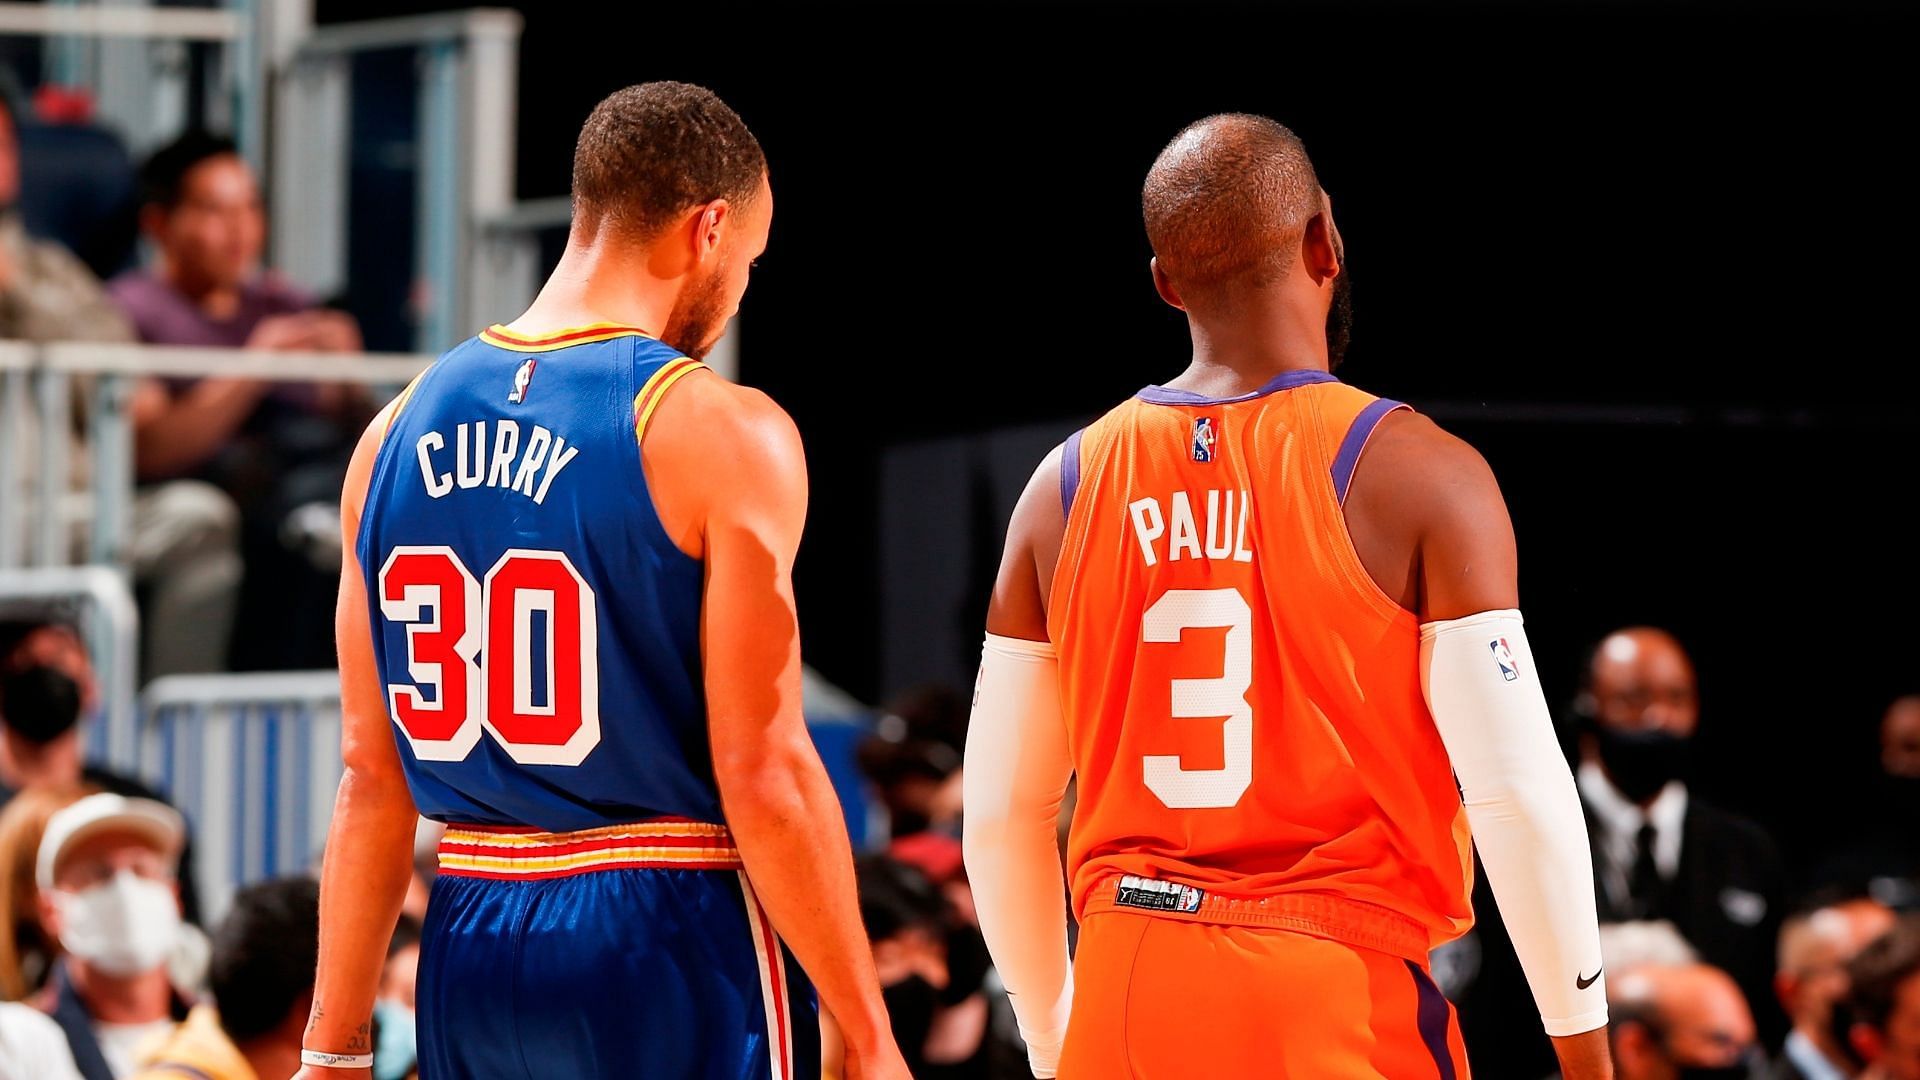 Steph Curry of the Golden State Warriors and Chris Paul of the Phoenix Suns